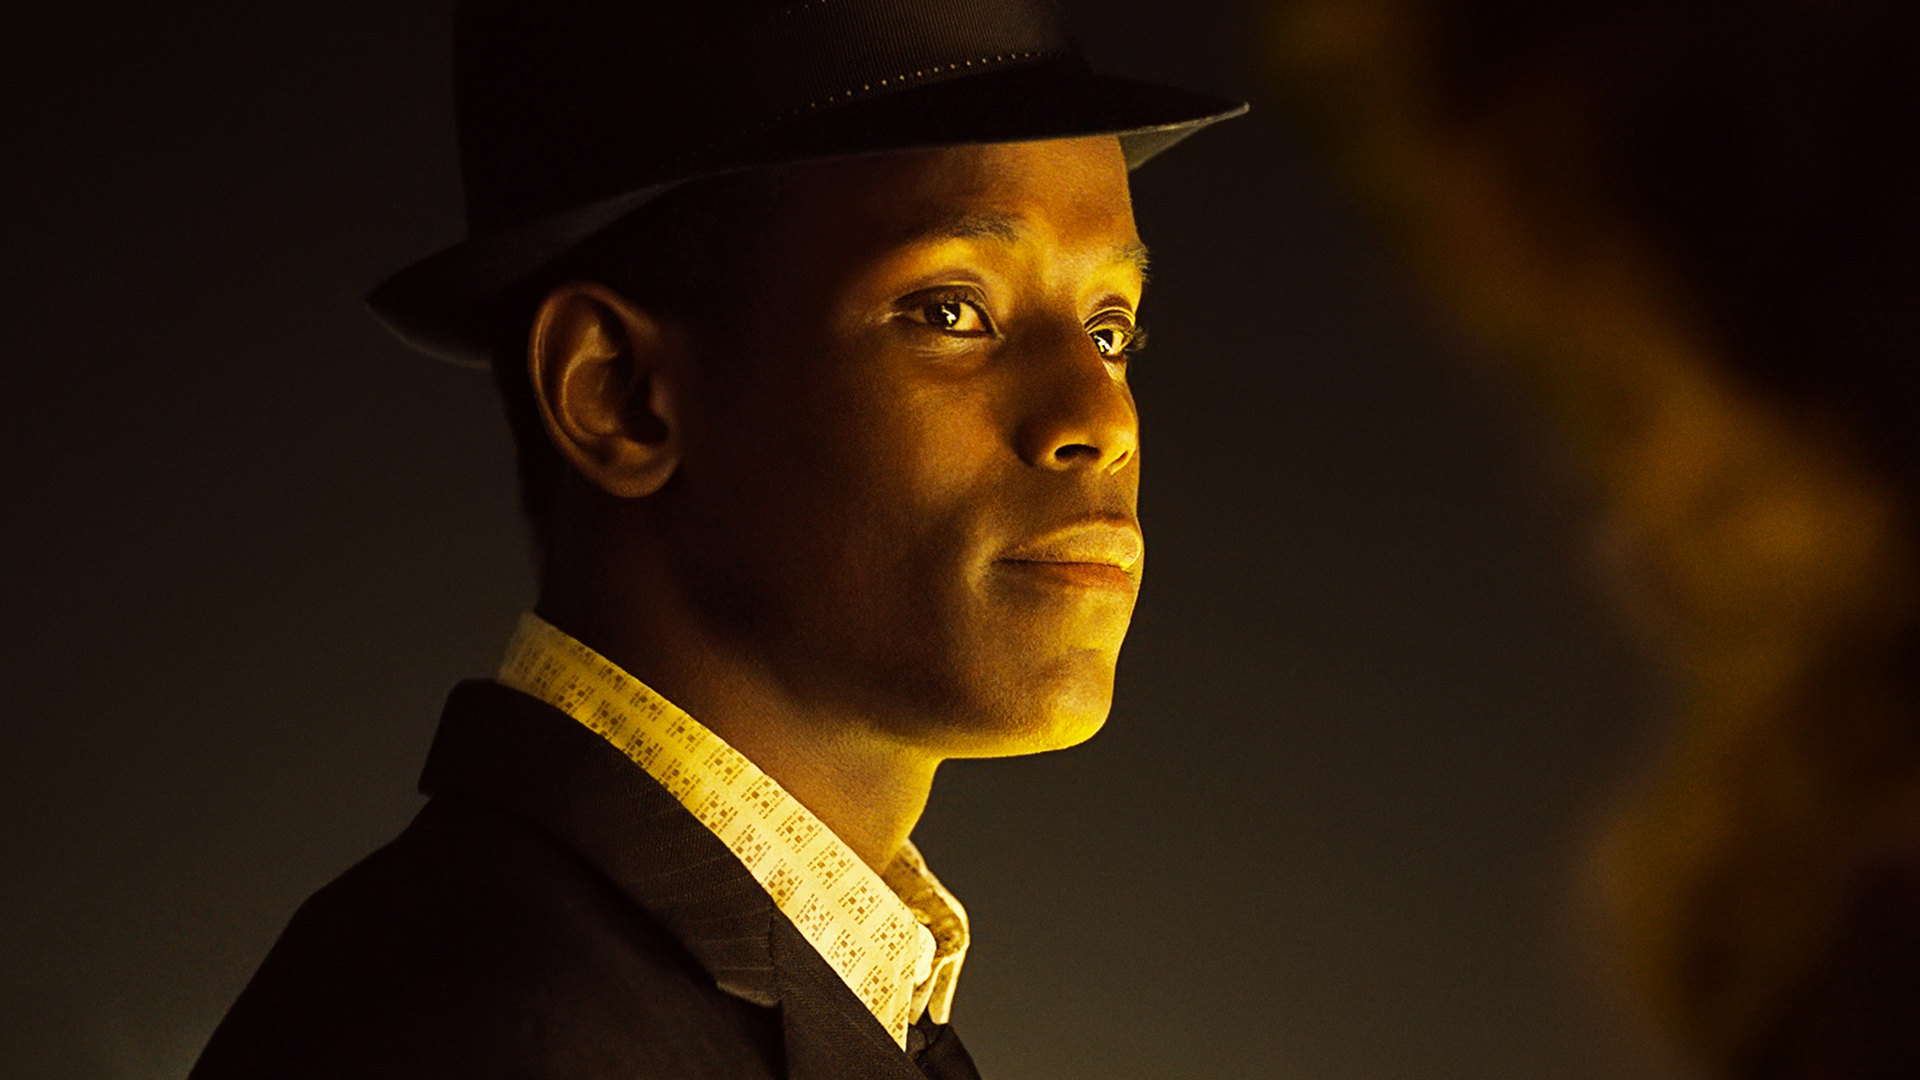 Young Black man in suit and hat lit by golden light